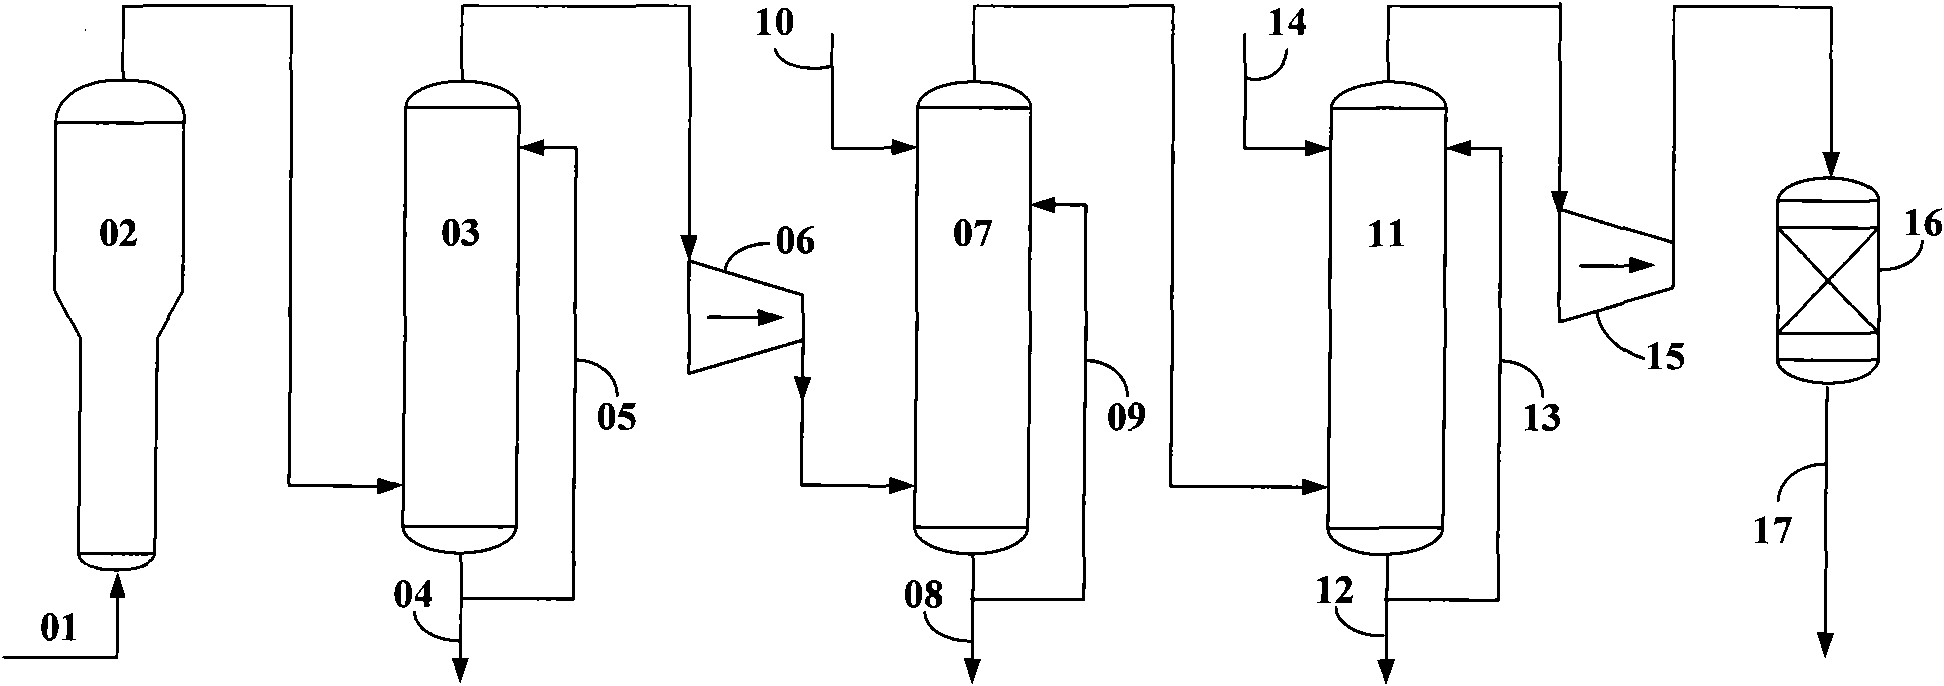 Method for removing O2, N2 and dimethyl ether from olefin streams